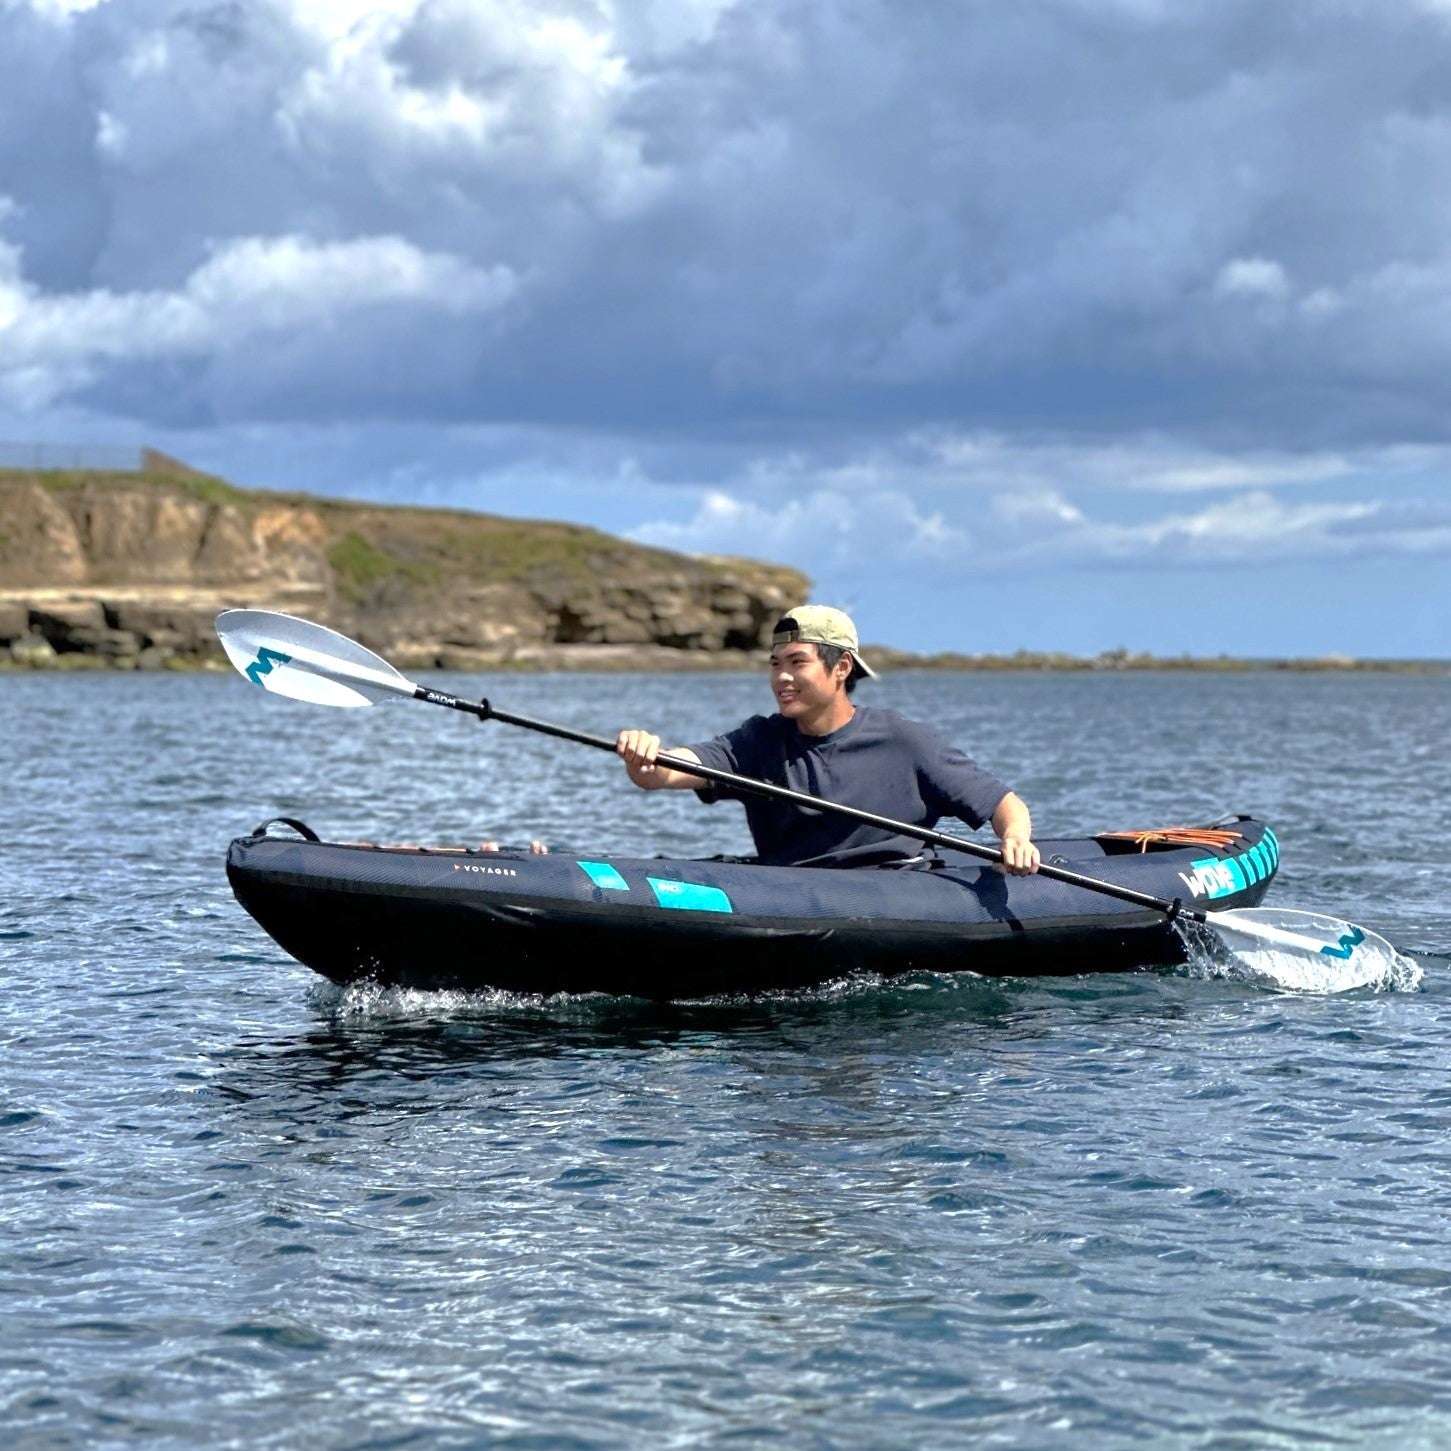 Voyager | Inflatable Kayak | Oxford Cloth | 1-Seater - Wave Sups UK